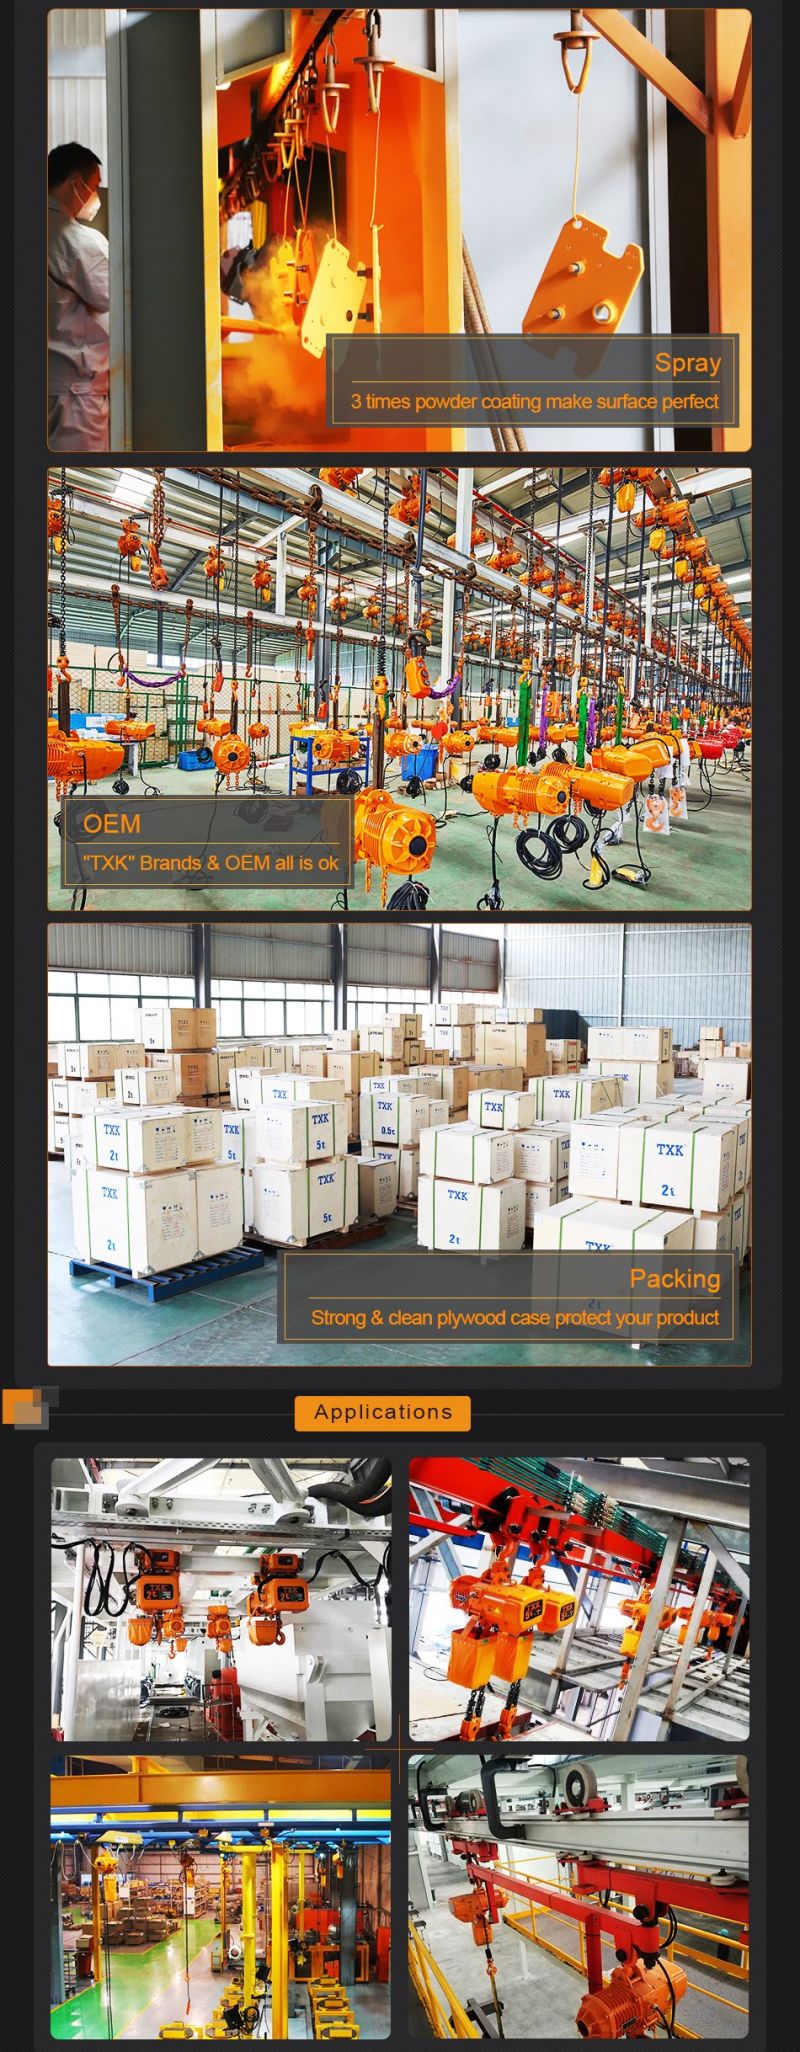 Golden Supplier Electric Chain Hoist with Trolley